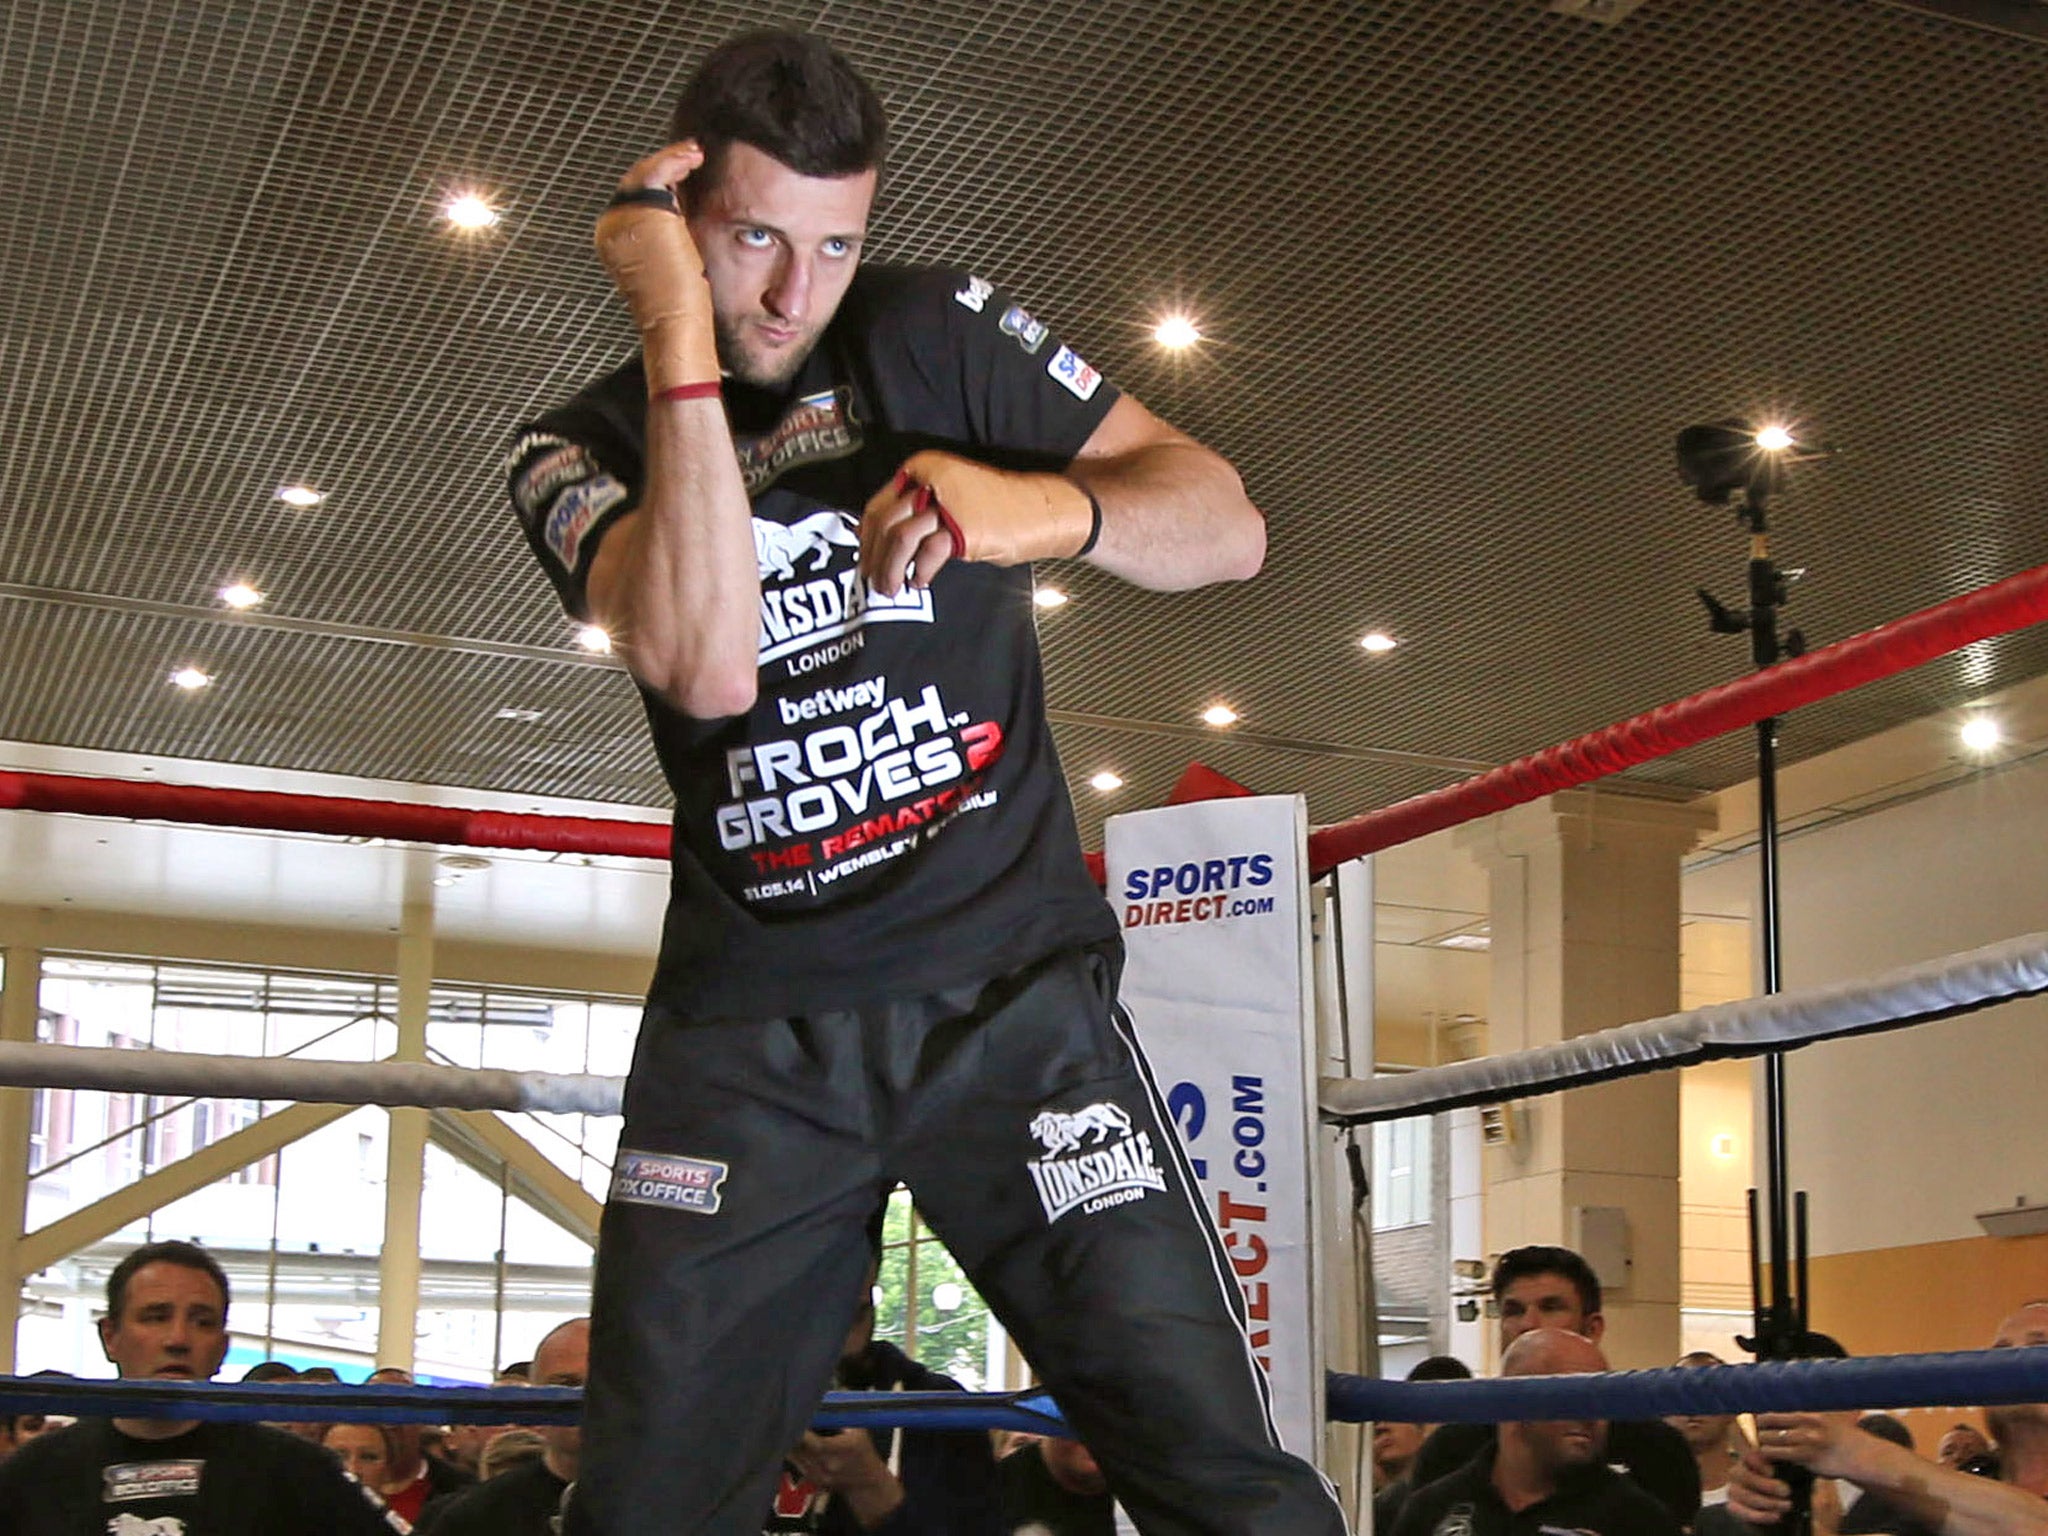 Carl Froch works out at Broadmarsh Shopping Centre in his home town, Nottingham